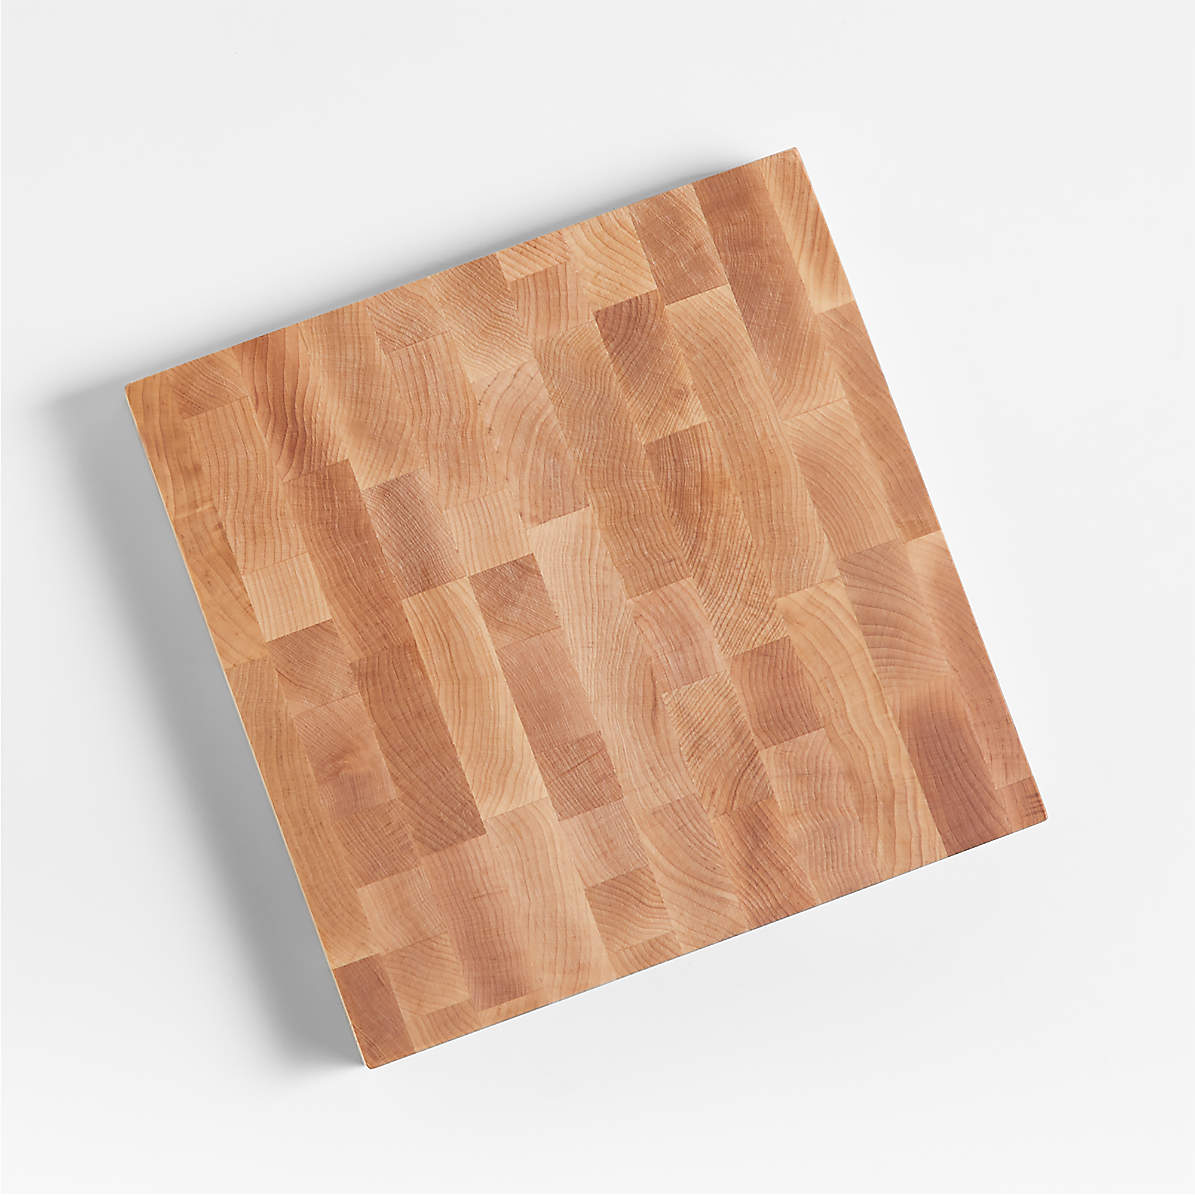 17 x 16 x 2 inch thick End Grain French Oak Butcher Block Solid Wood Large  Cutting Board